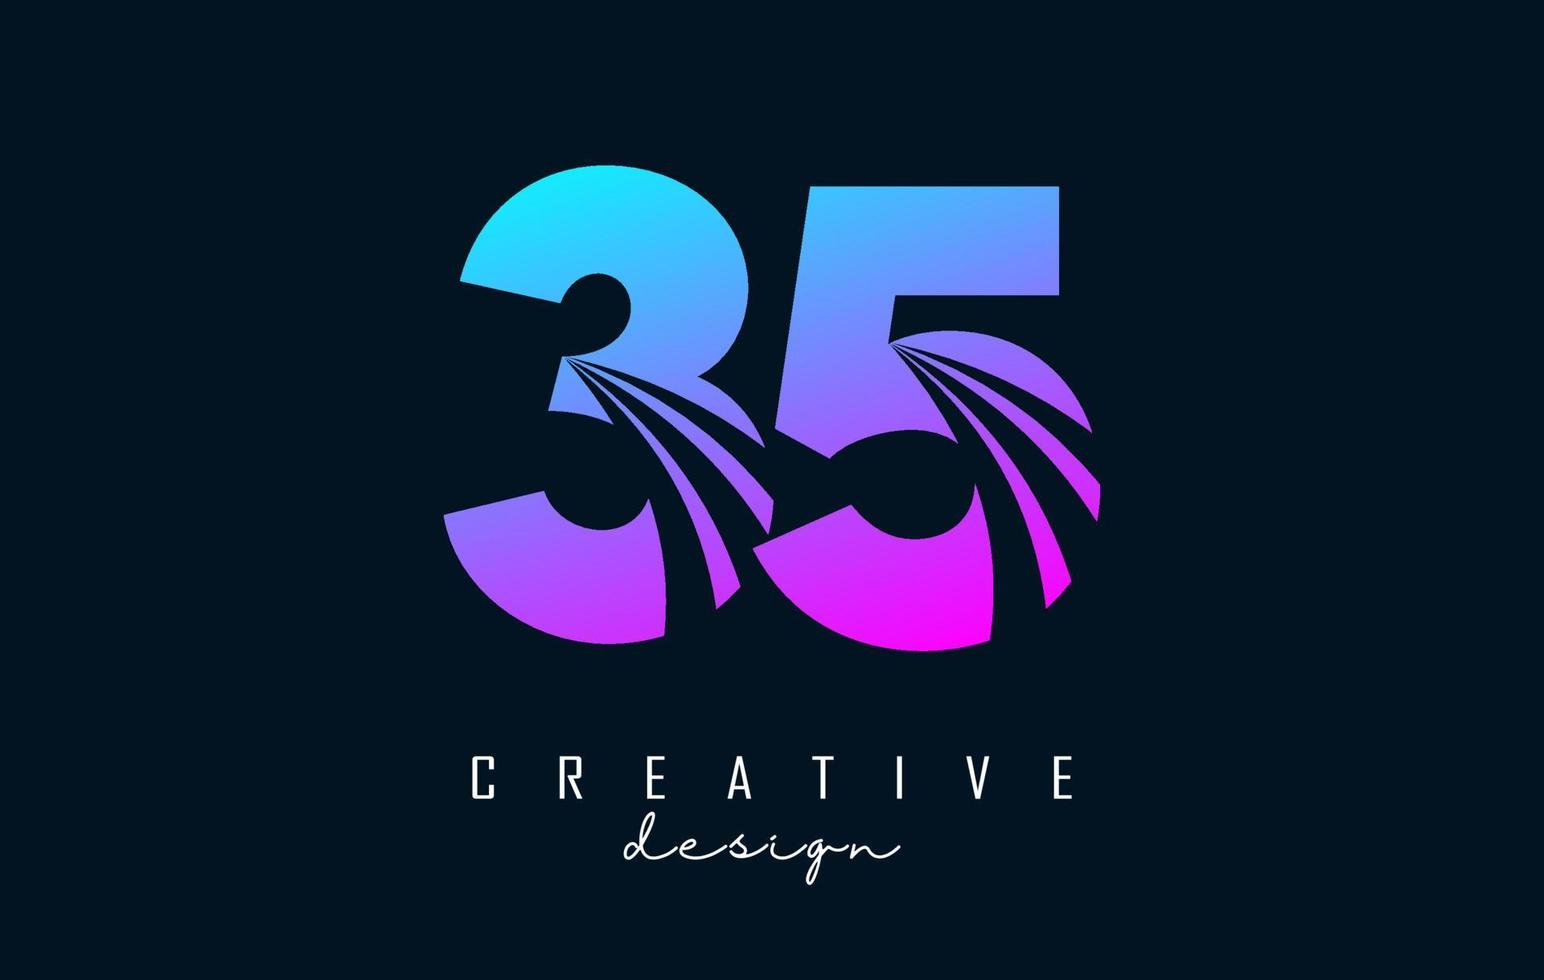 Colorful Creative number 35 3 5 logo with leading lines and road concept design. Number with geometric design. vector